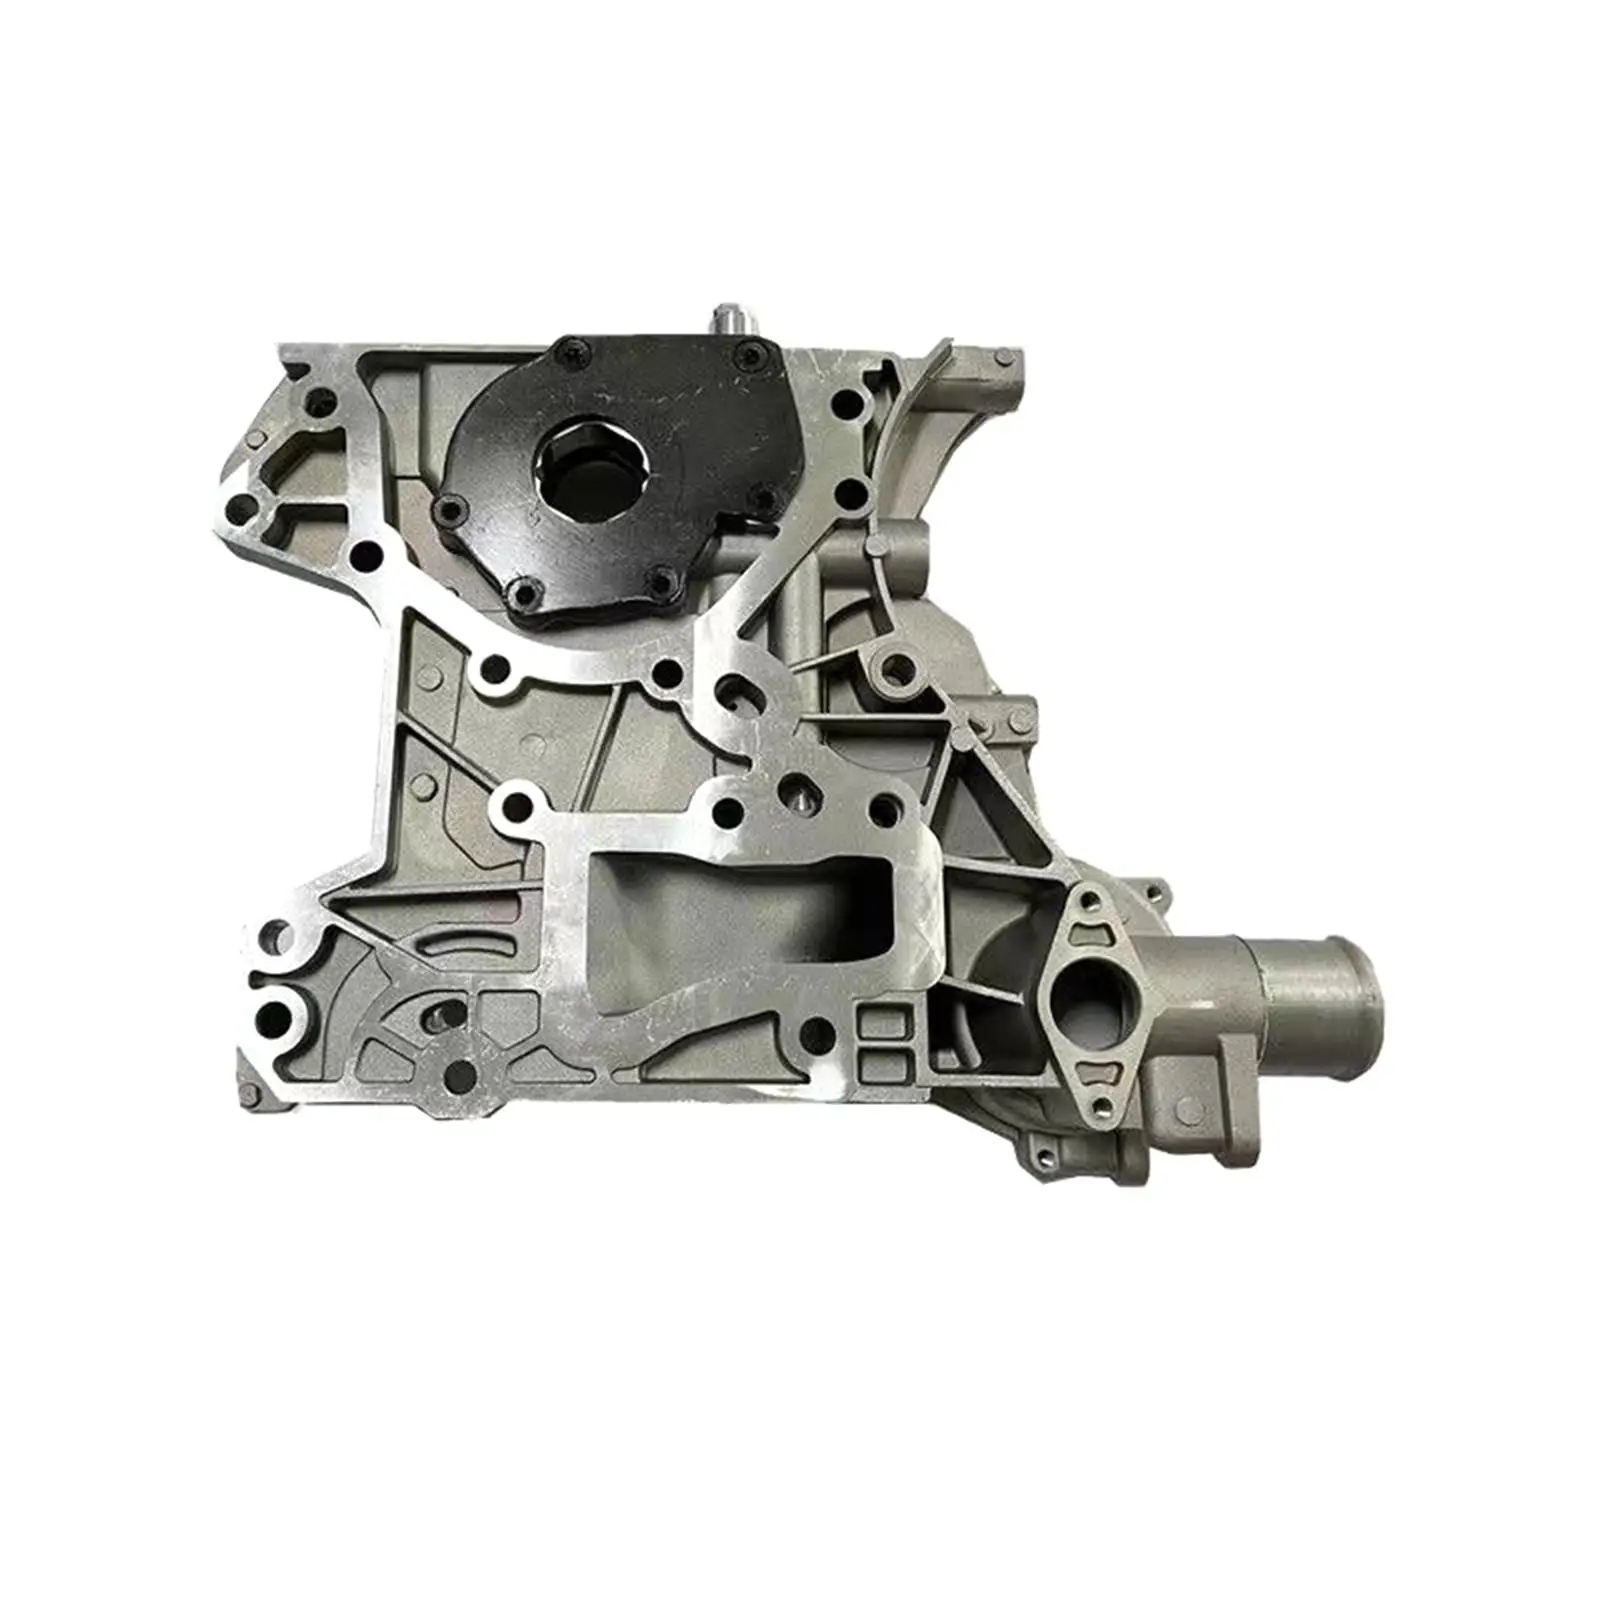 Oil Pump Timing Cover 55556428 25190867 Replacement Metal Parts Assembly for Insignia Zafira Durable Vehicle Repair Parts